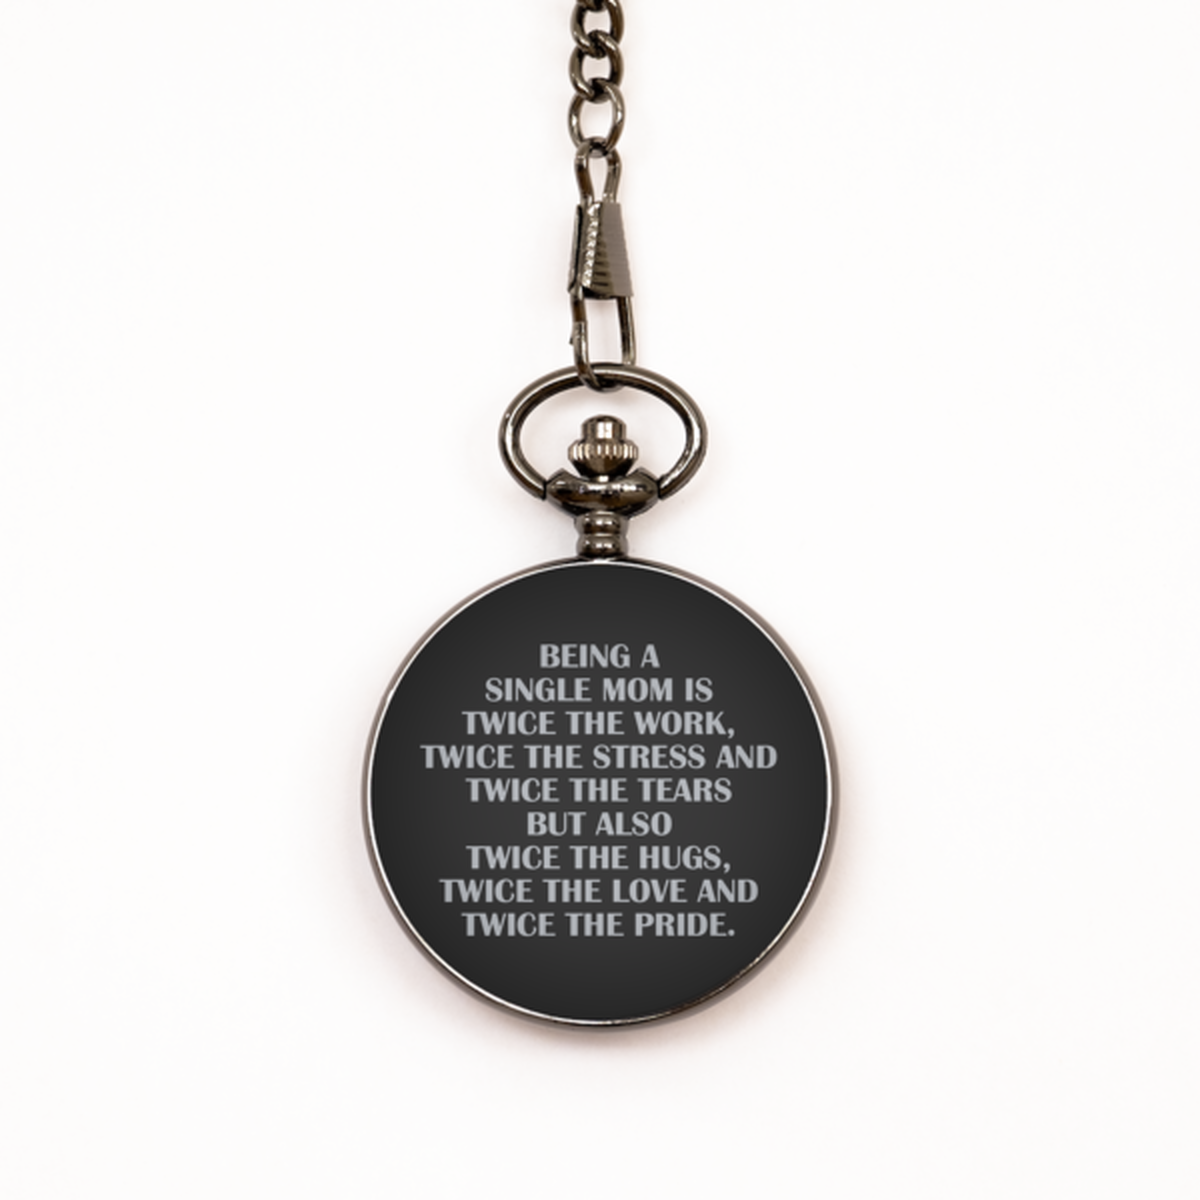 To My Single Mom Black Pocket Watch, Twice The Work, Mothers Day Gifts For Single Mom From Friends, Birthday Gifts For Women